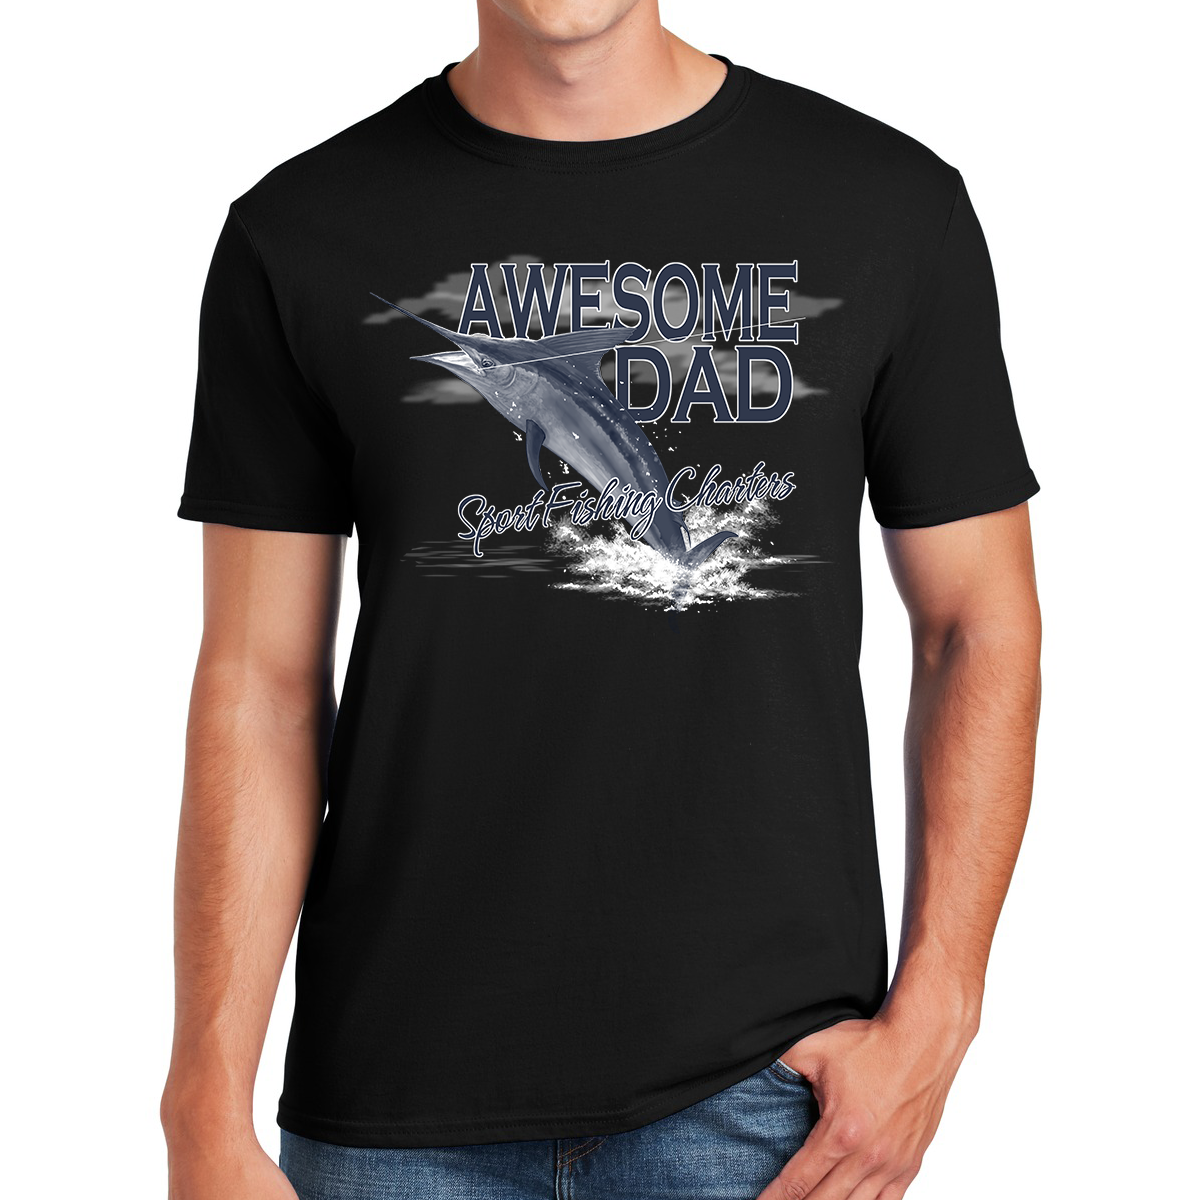 Awesome Dad Captain Of Sport Fishing Charters Gift For Dads T-shirt